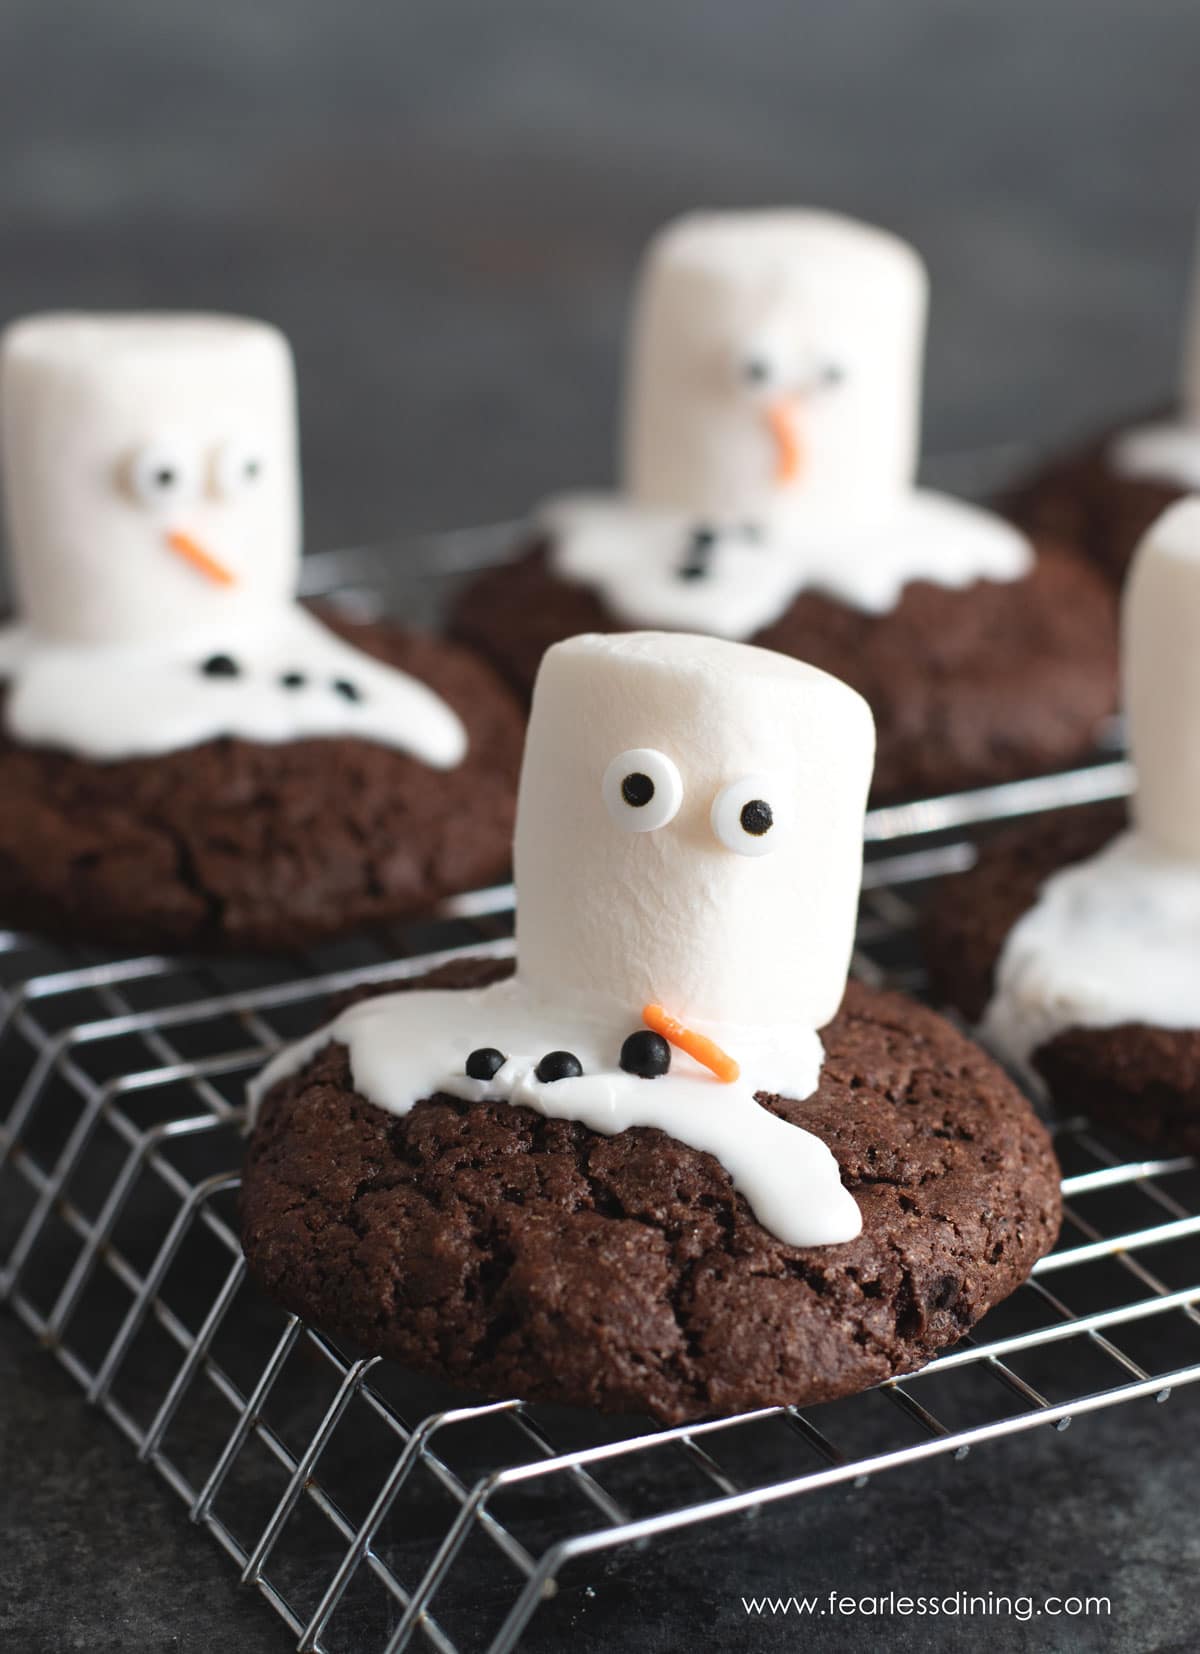 Some melted snowmen on the chocolate cookies.